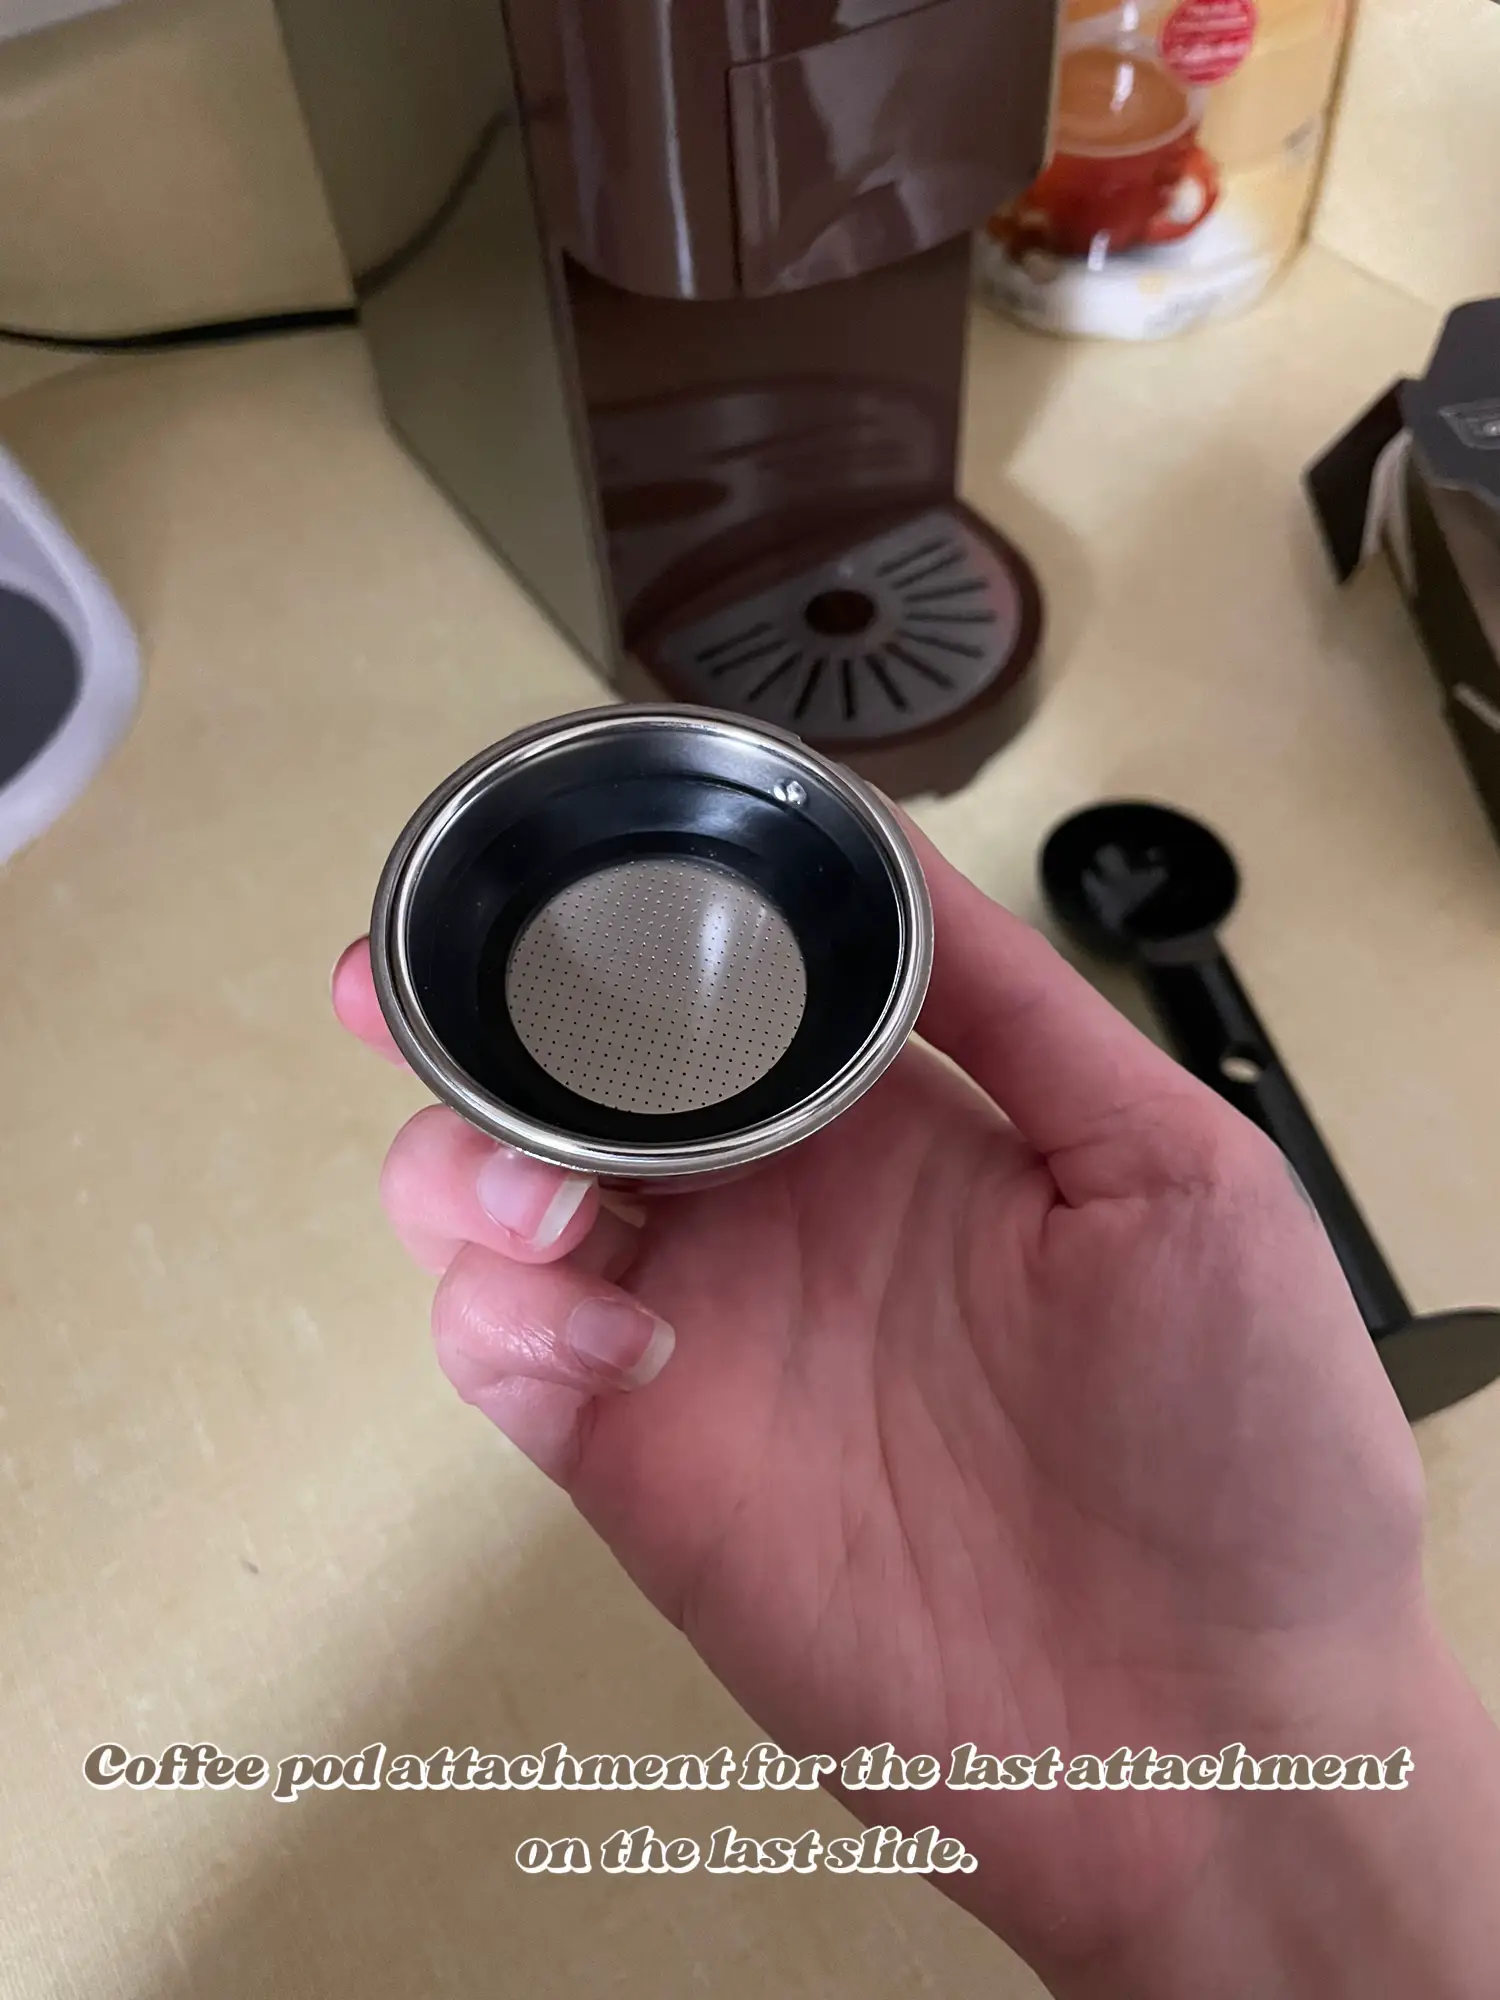 Found OL pods at HomeGoods that appear to be from Italy? : r/nespresso